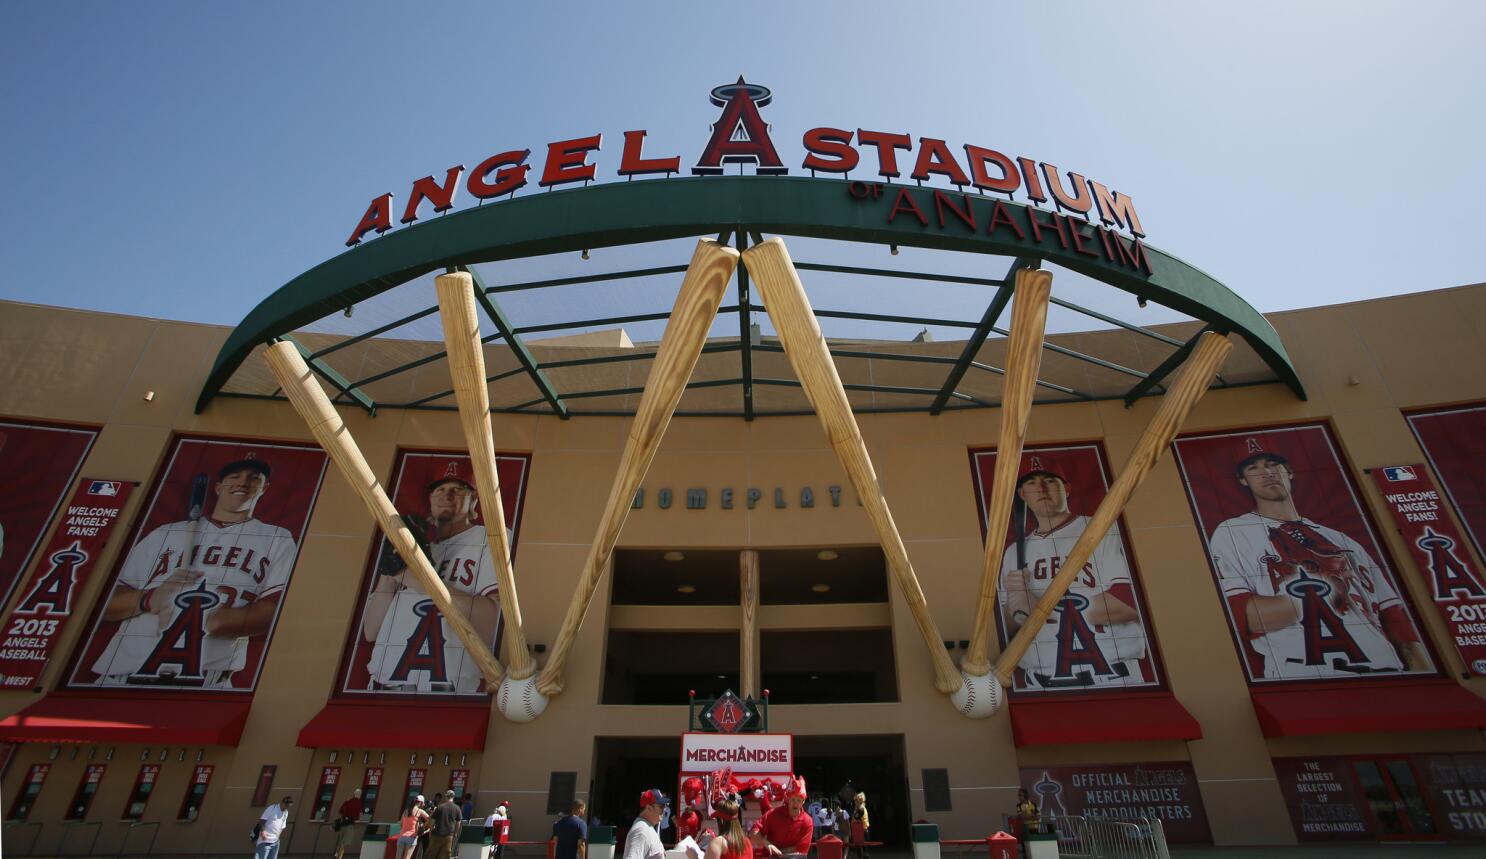 New Angels Owner Would Need To Invest In Stadium Upgrades